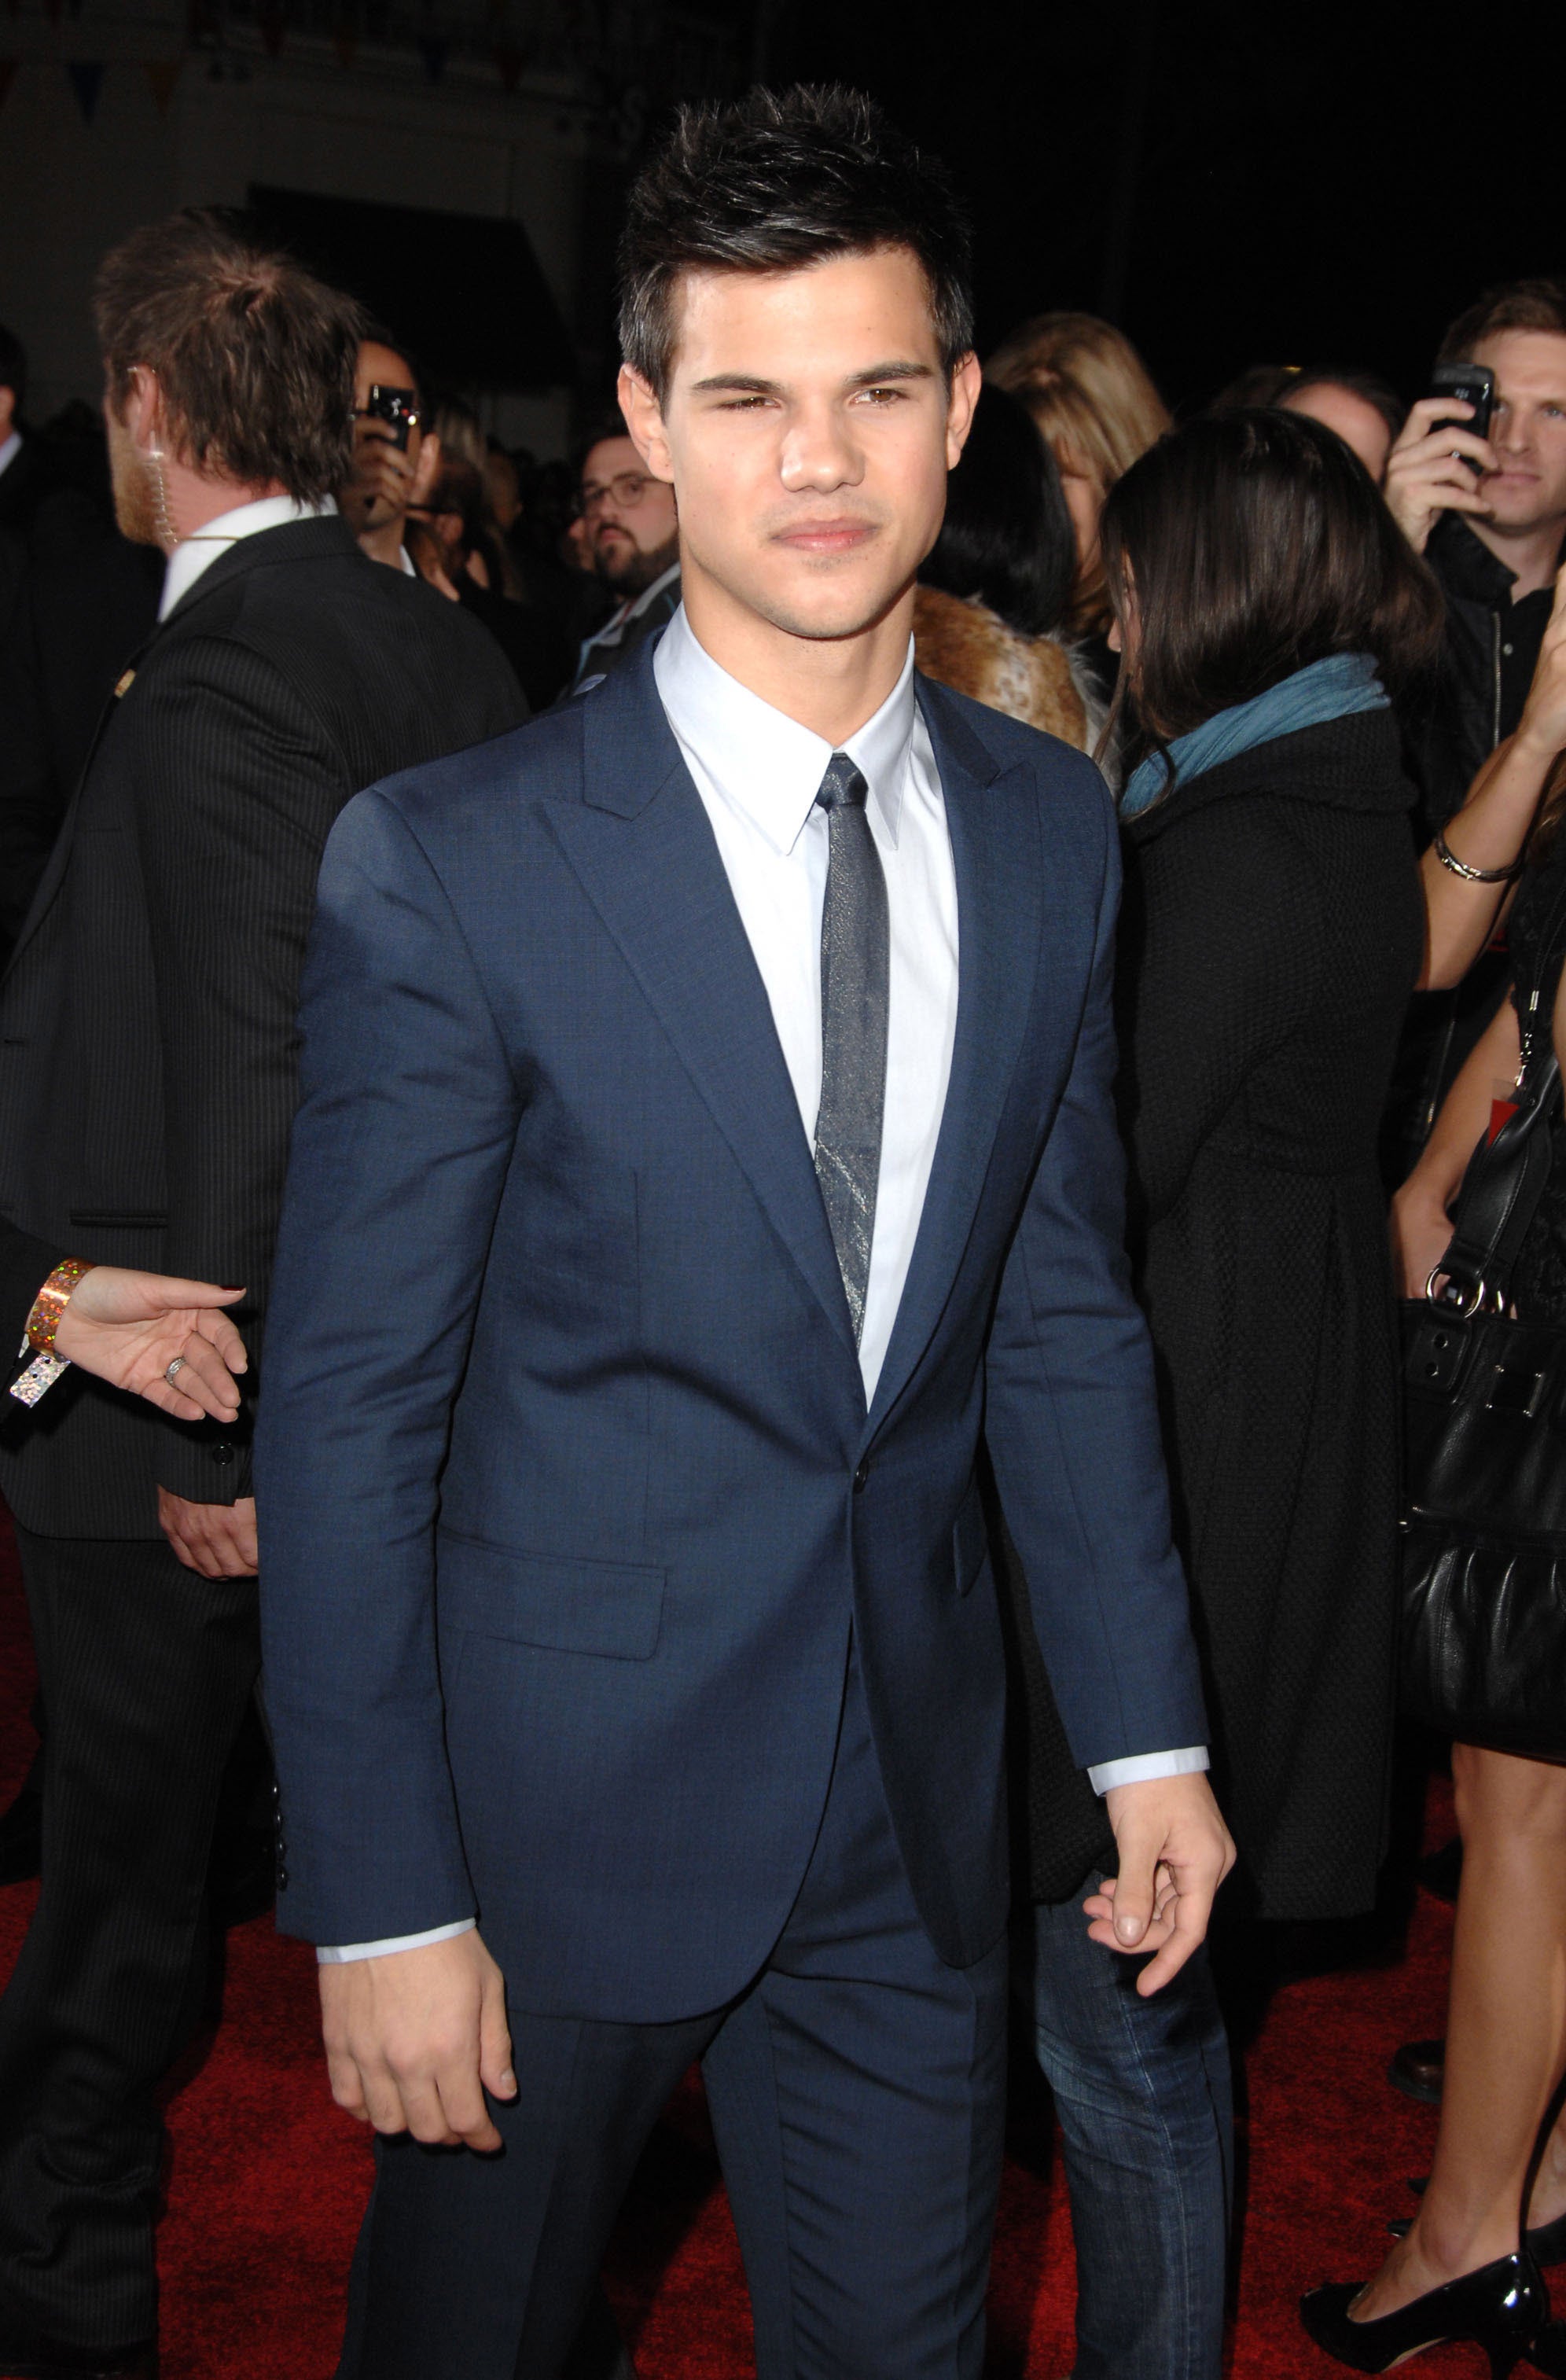 Tyler in a suit and tie on the red carpet